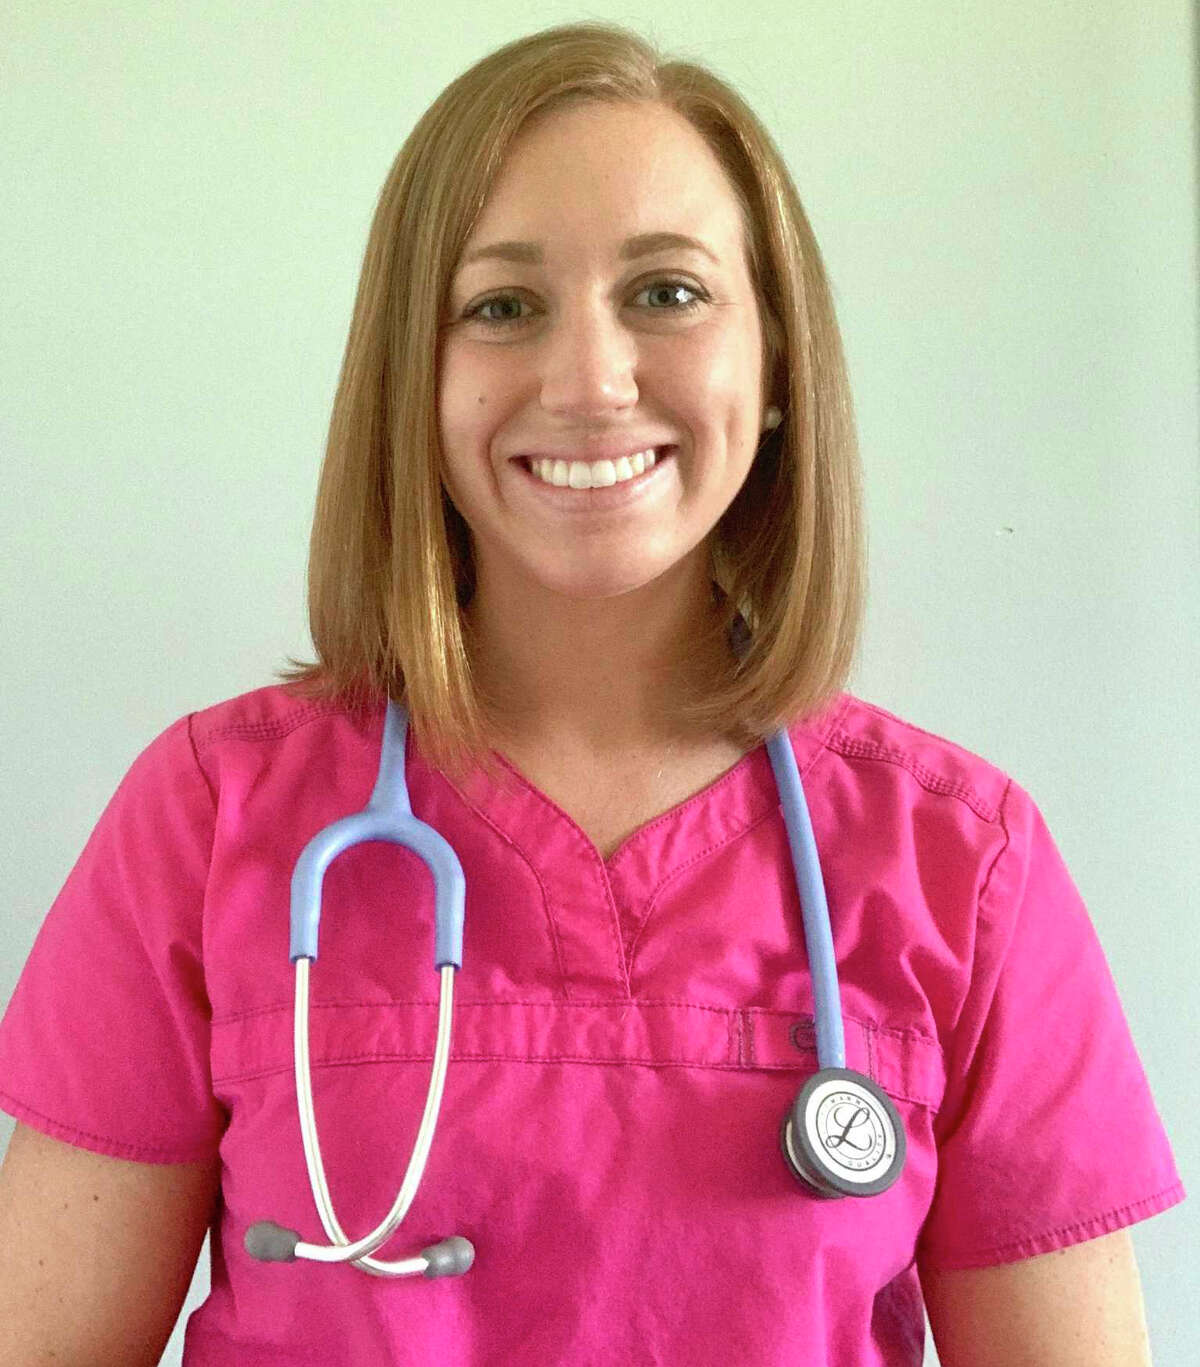 Registered nurse Rachel Prudhomme said she was shocked to learn she was nominated for "Heroes Unmasked." "While I think my job is important, I wouldn't consider myself a hero by any means. I am simply doing the best that I can in the job that I have," she said. (Courtesy photo)